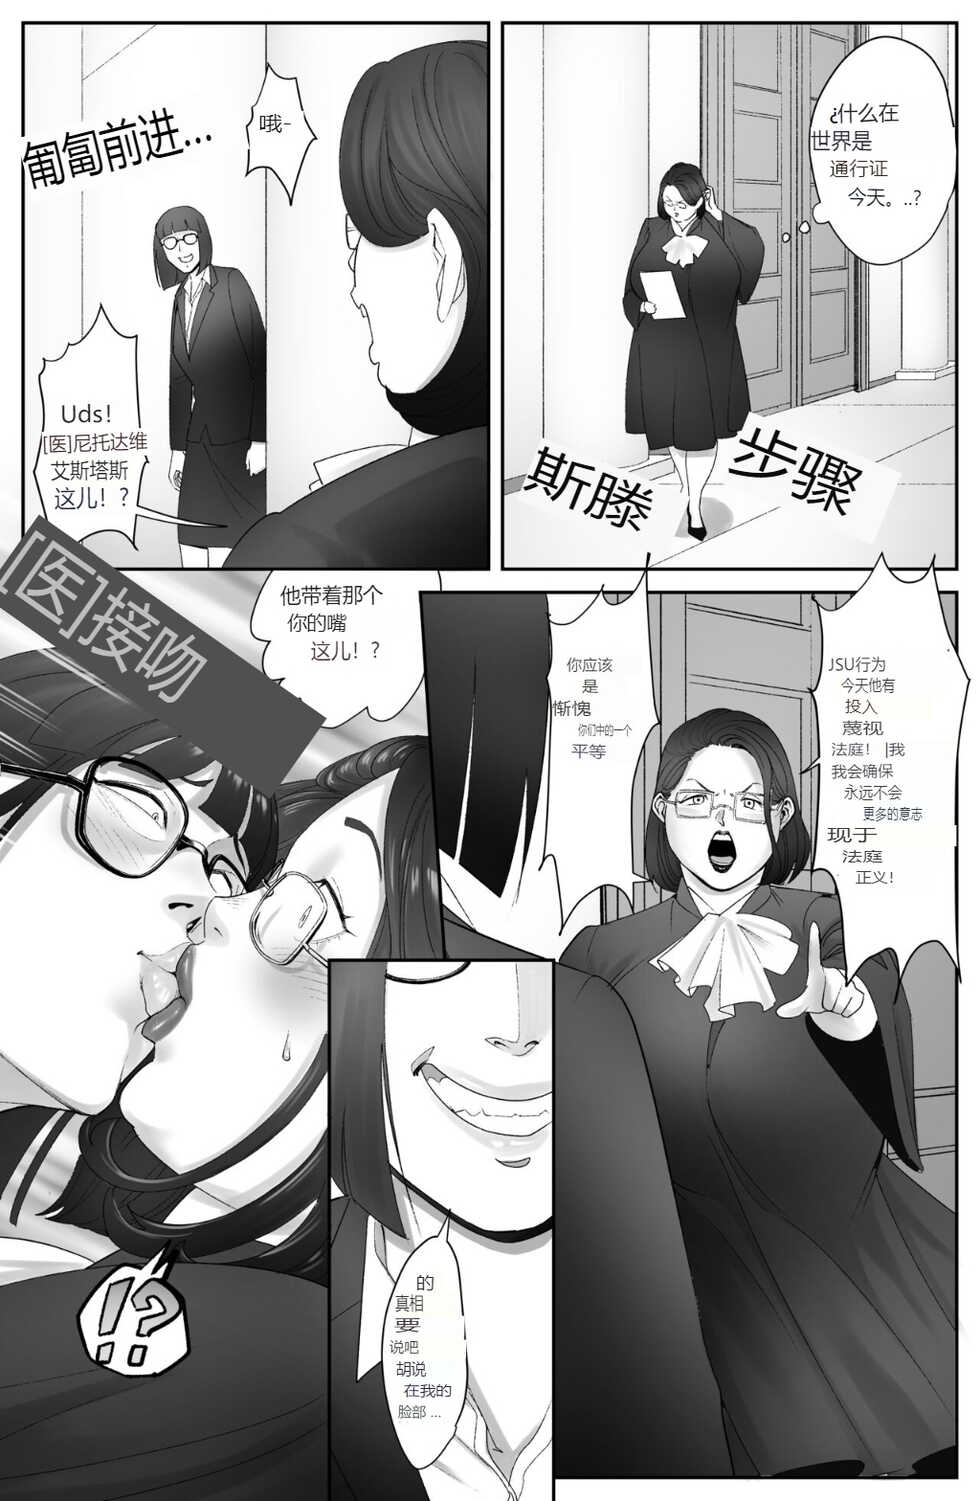 [Haburashi] The Man who recently awakened the power of possession vol 1 y 2 - Page 17